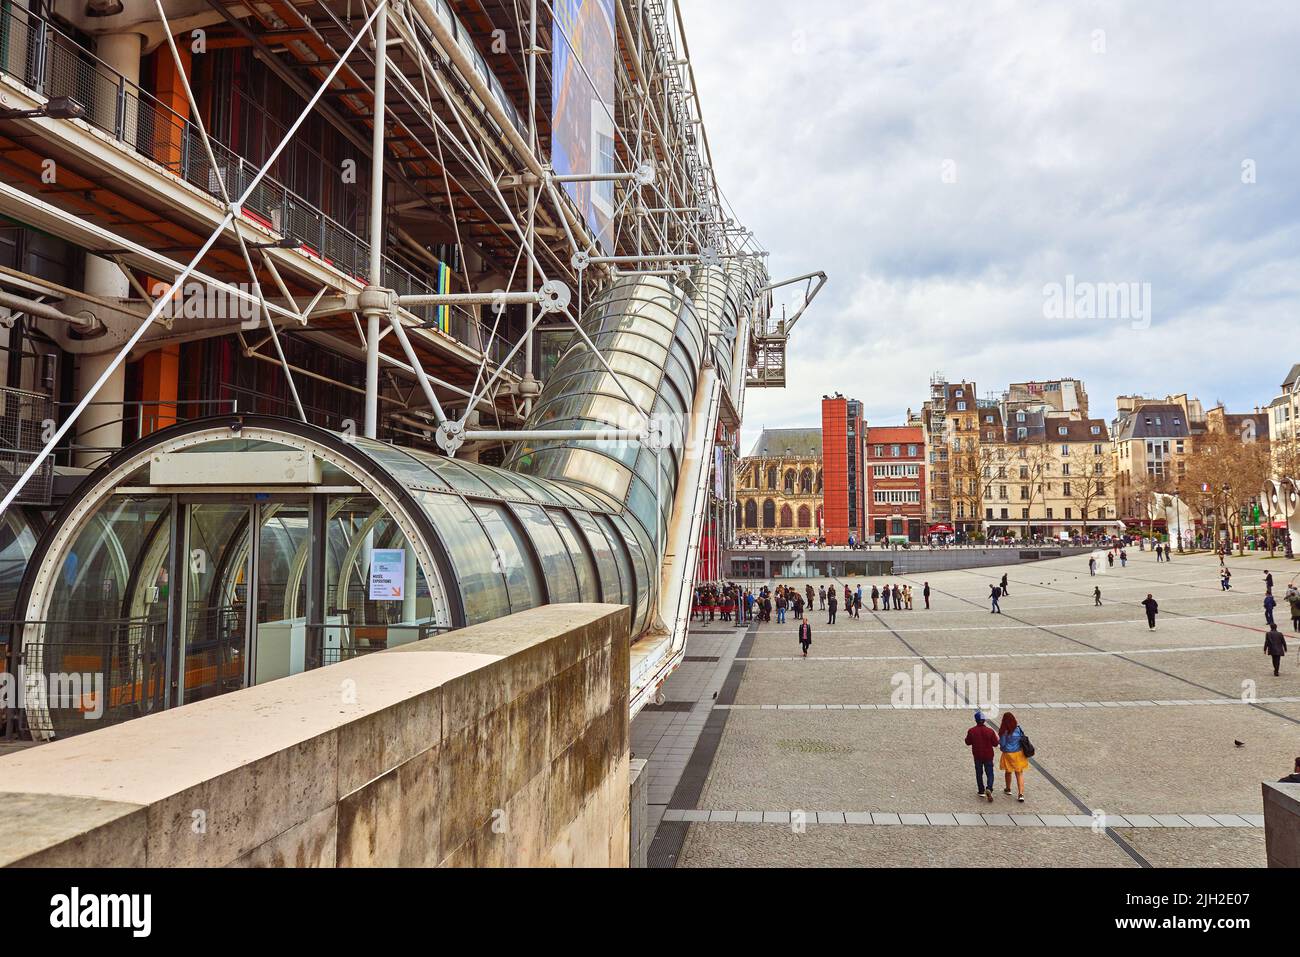 PARIS, FRANCE -APRIL 7, 2018: National Center for Art and Culture Georges Pompidou, in common speech Center Georges Pompidou, Center Pompidou or Beaub Stock Photo